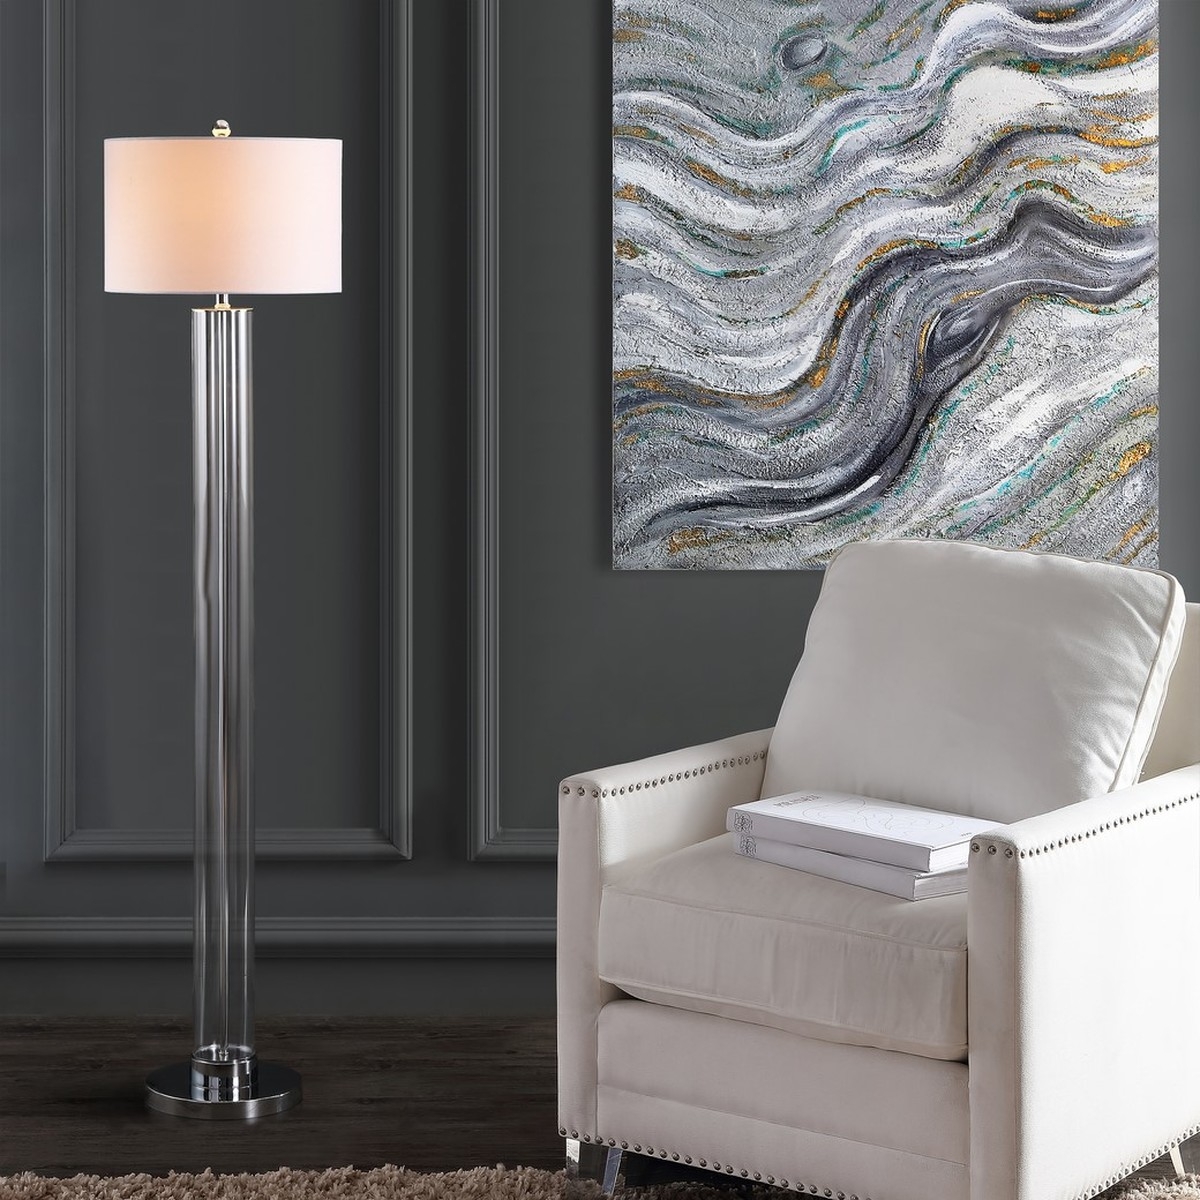 Lovato 64-Inch H Floor Lamp - Clear - Arlo Home - Image 3